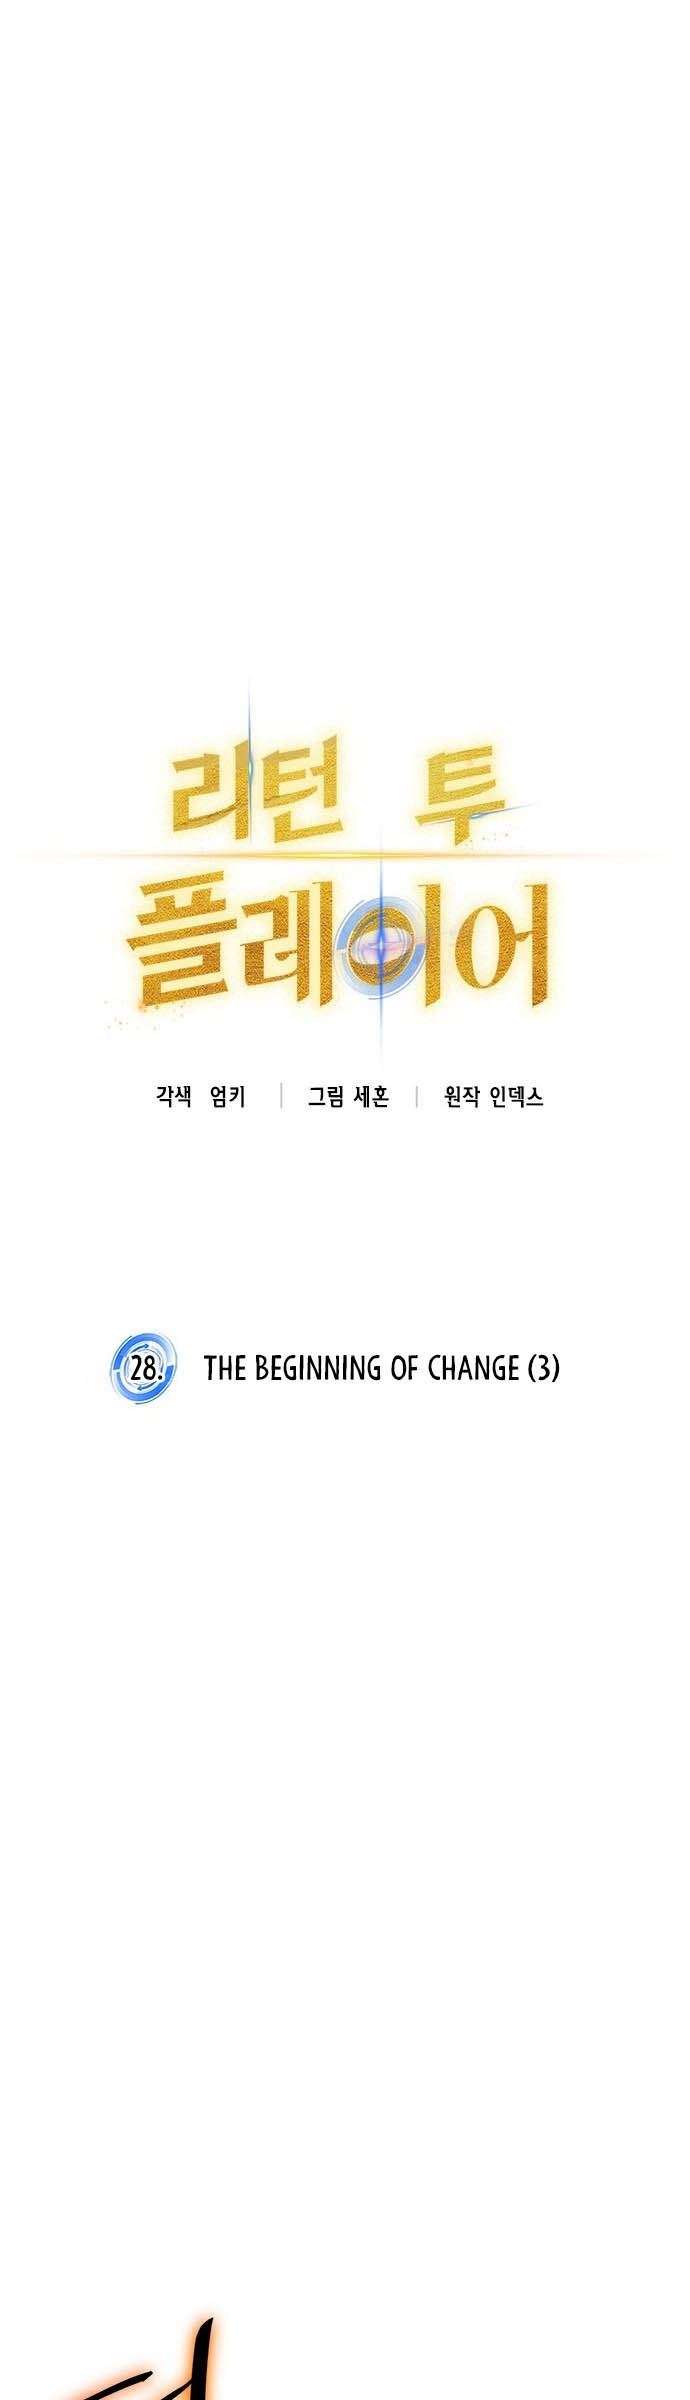 Return to Player Chapter 28